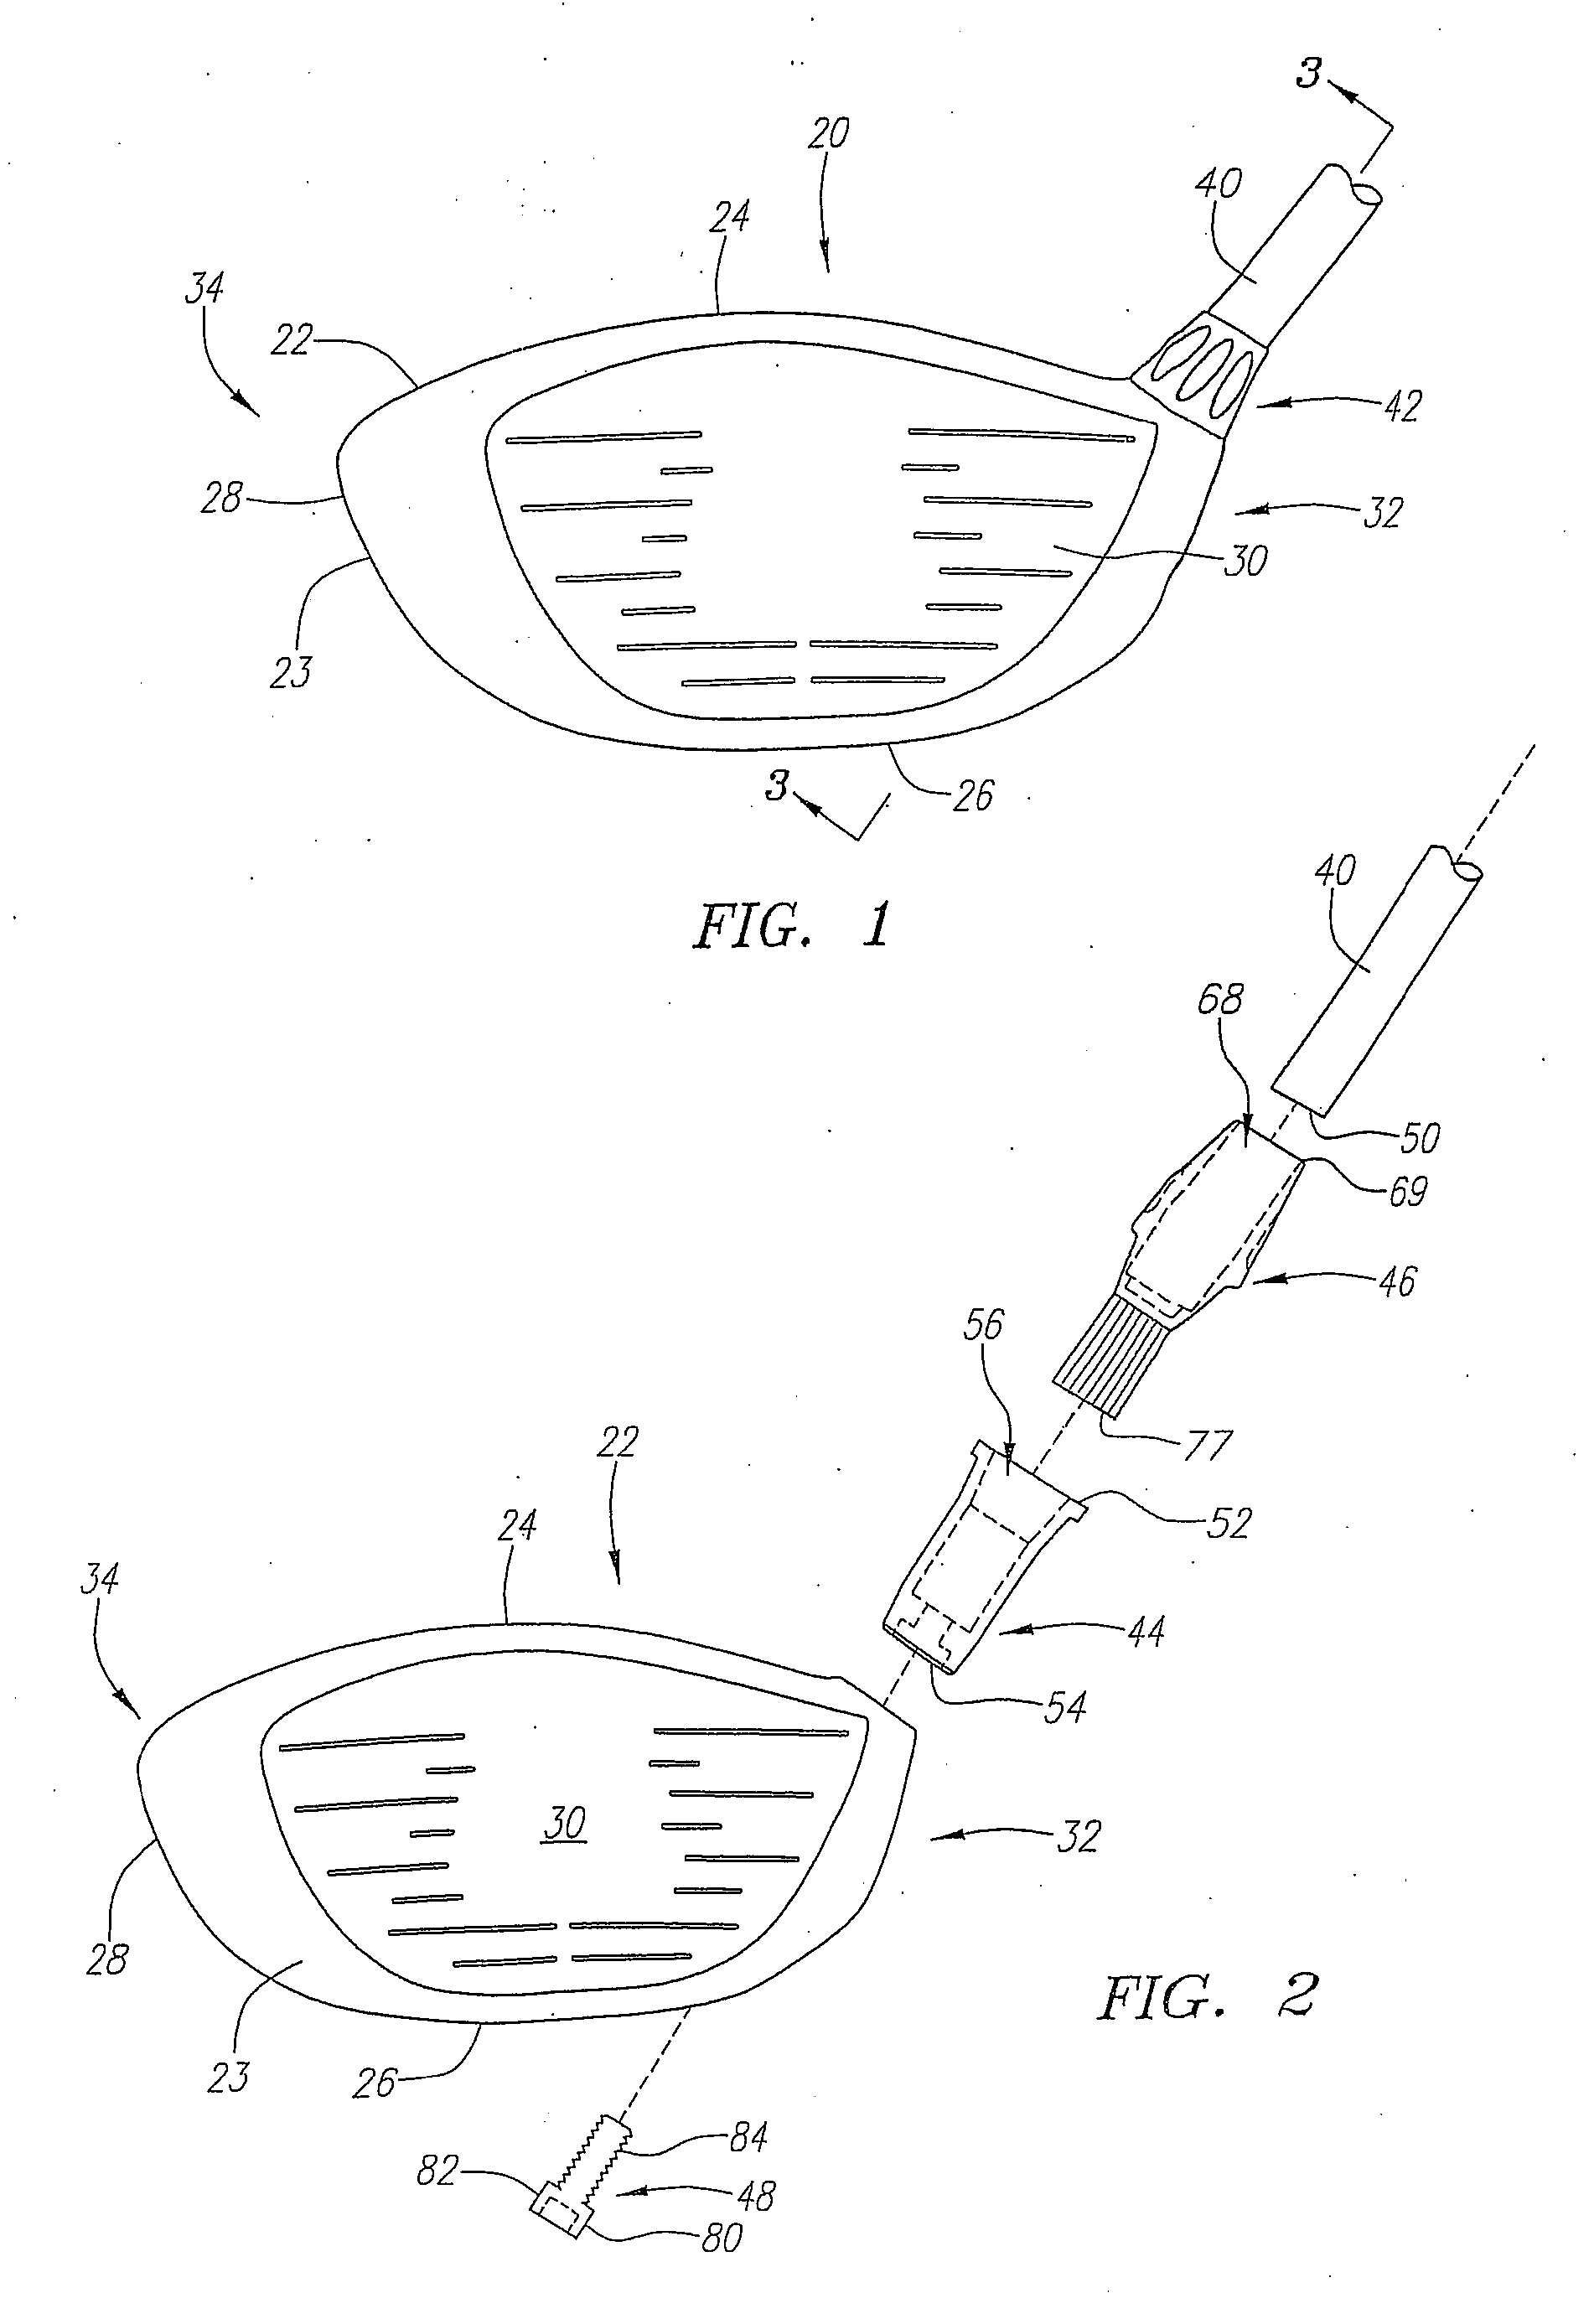 Iron-Type Golf Club with Interchangeable Head-Shaft Connection